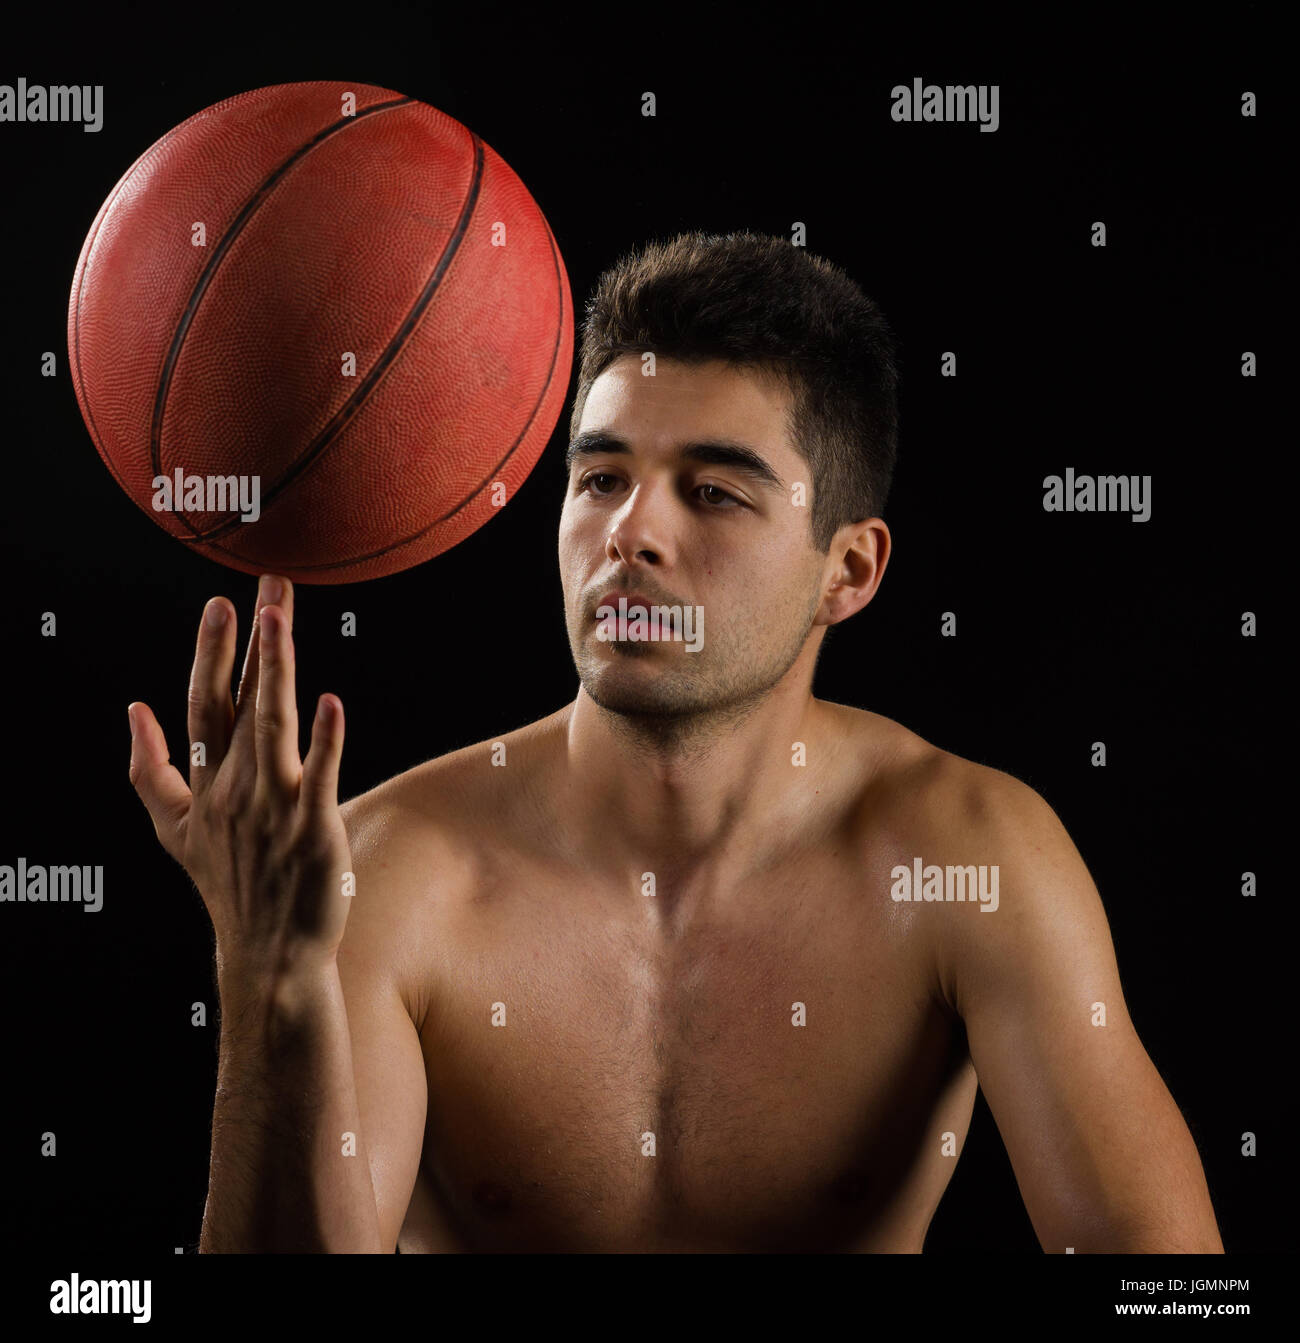 Isolated image of a basketball player spinning a ball on finger Stock Photo